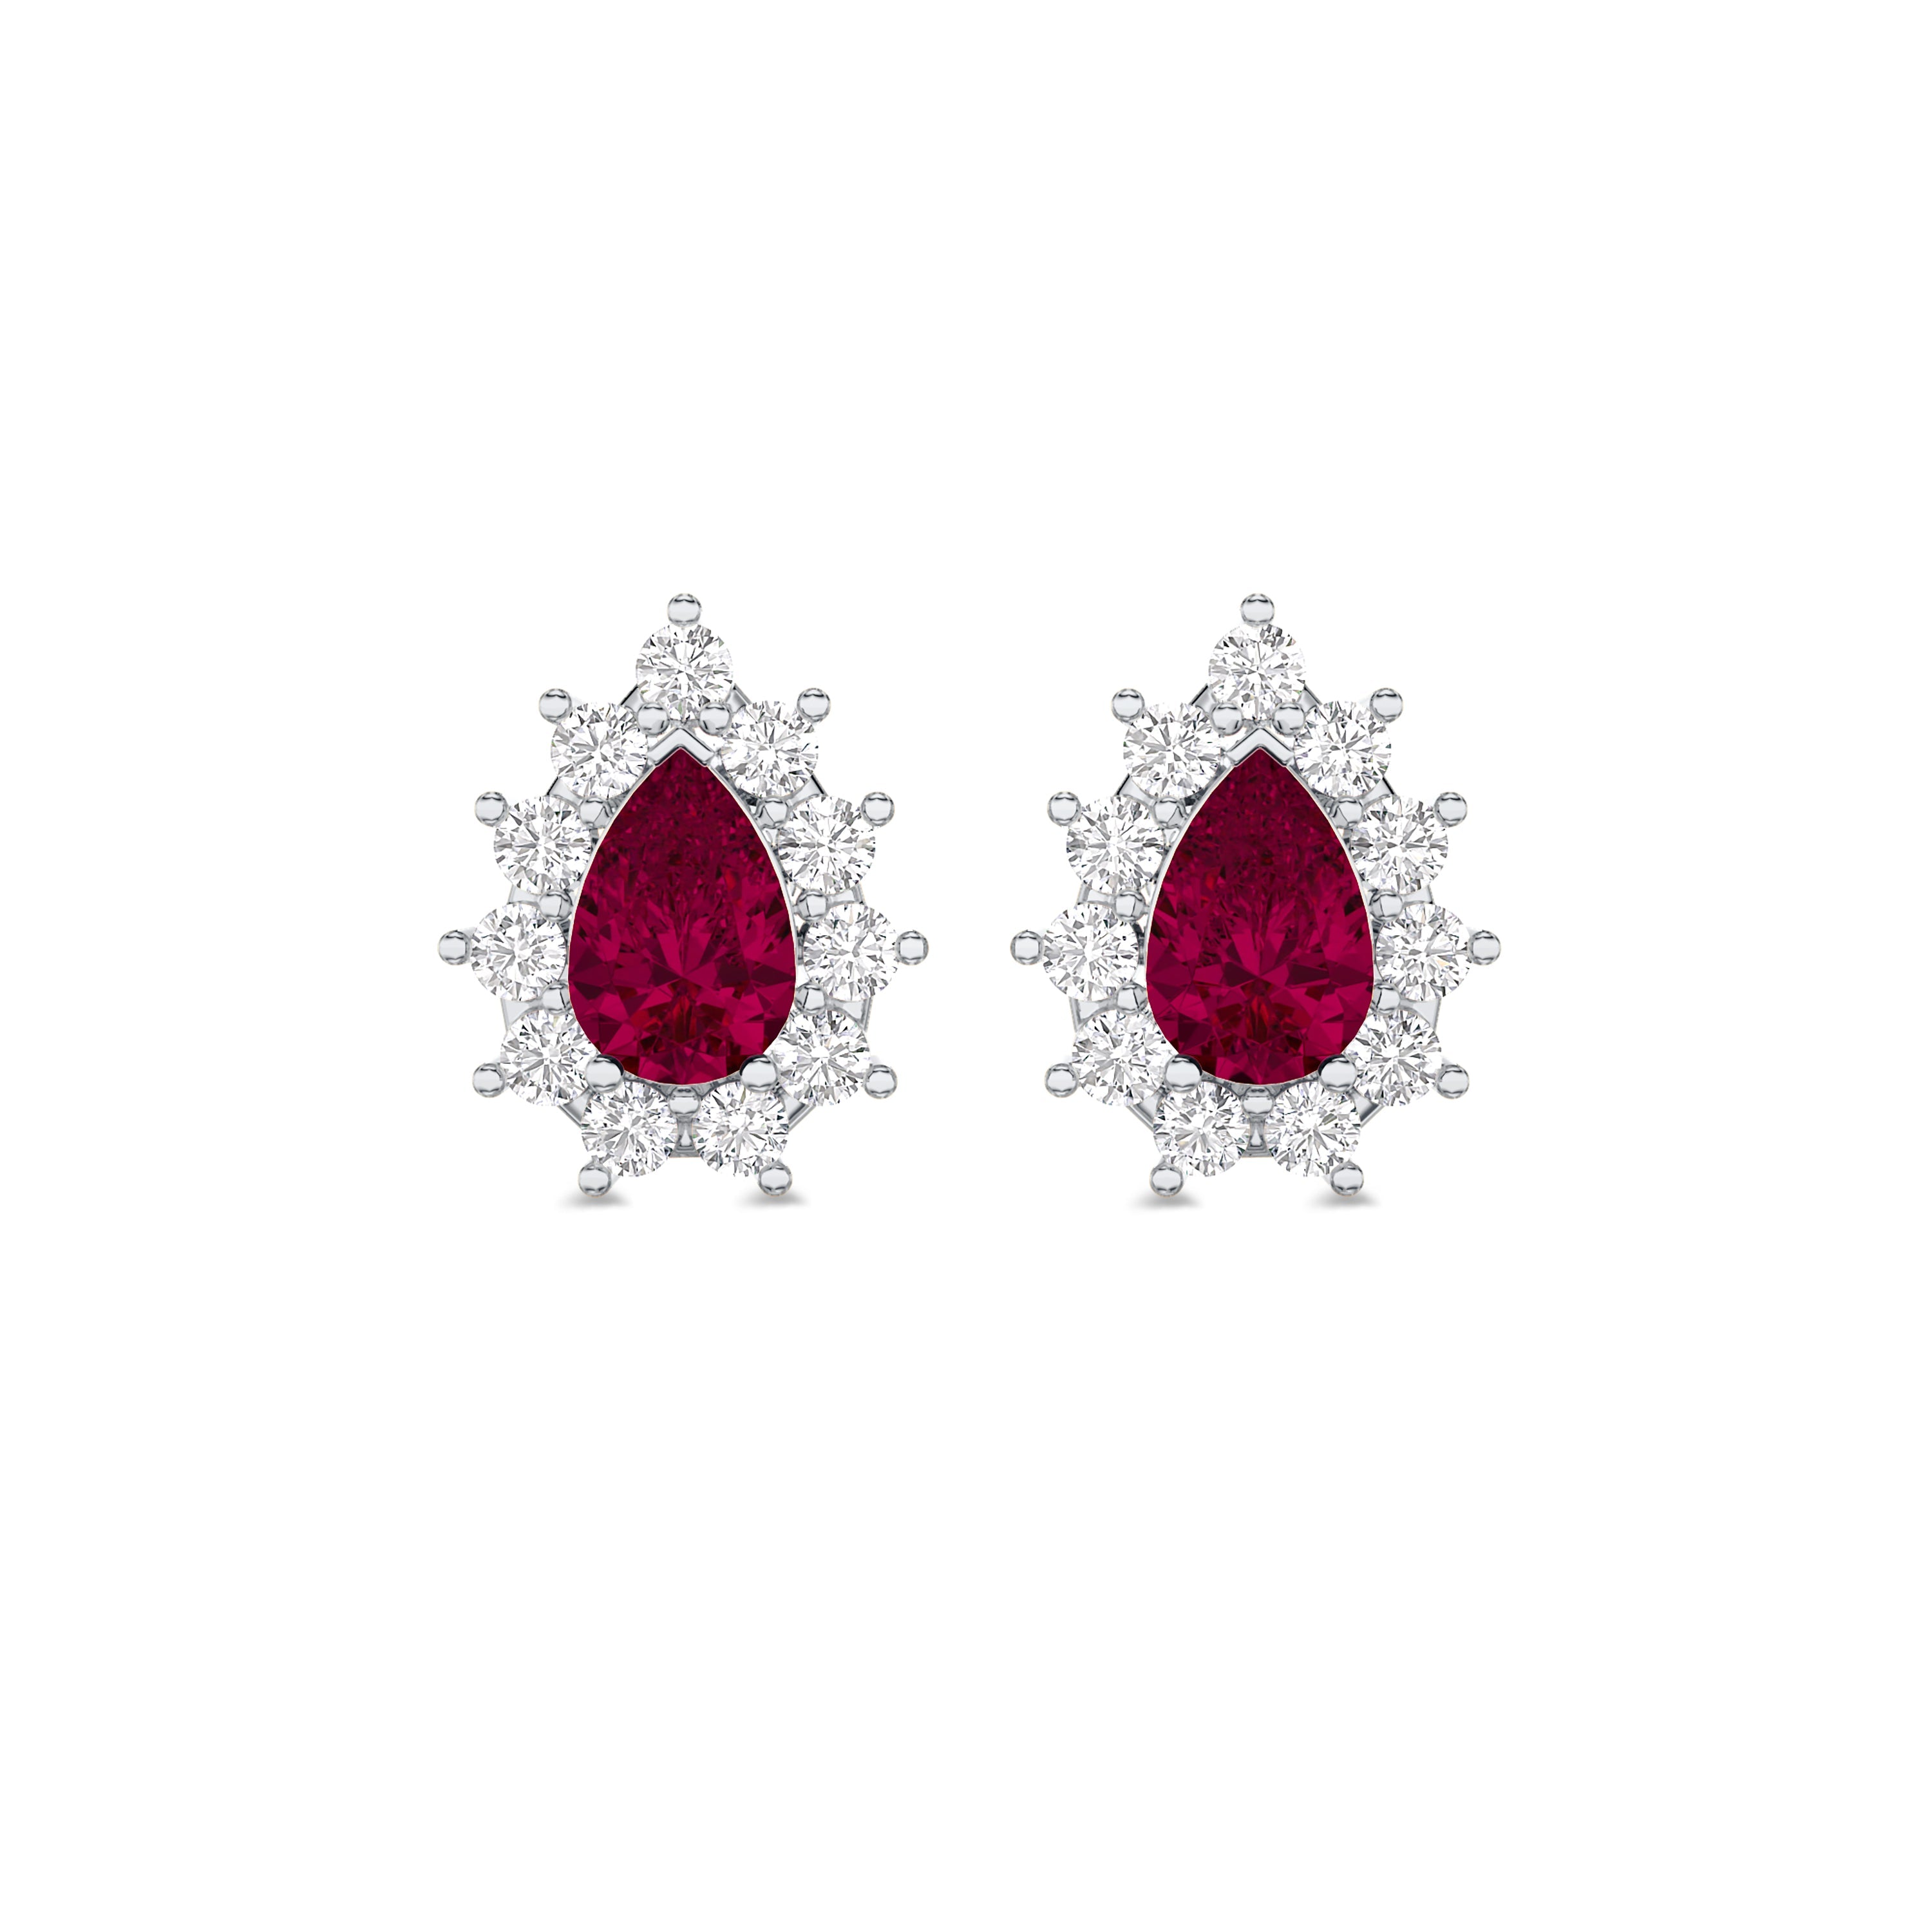 18K white gold, 0.43 carat diamond and 1.03 carat ruby earrings in FG color and SI clarity